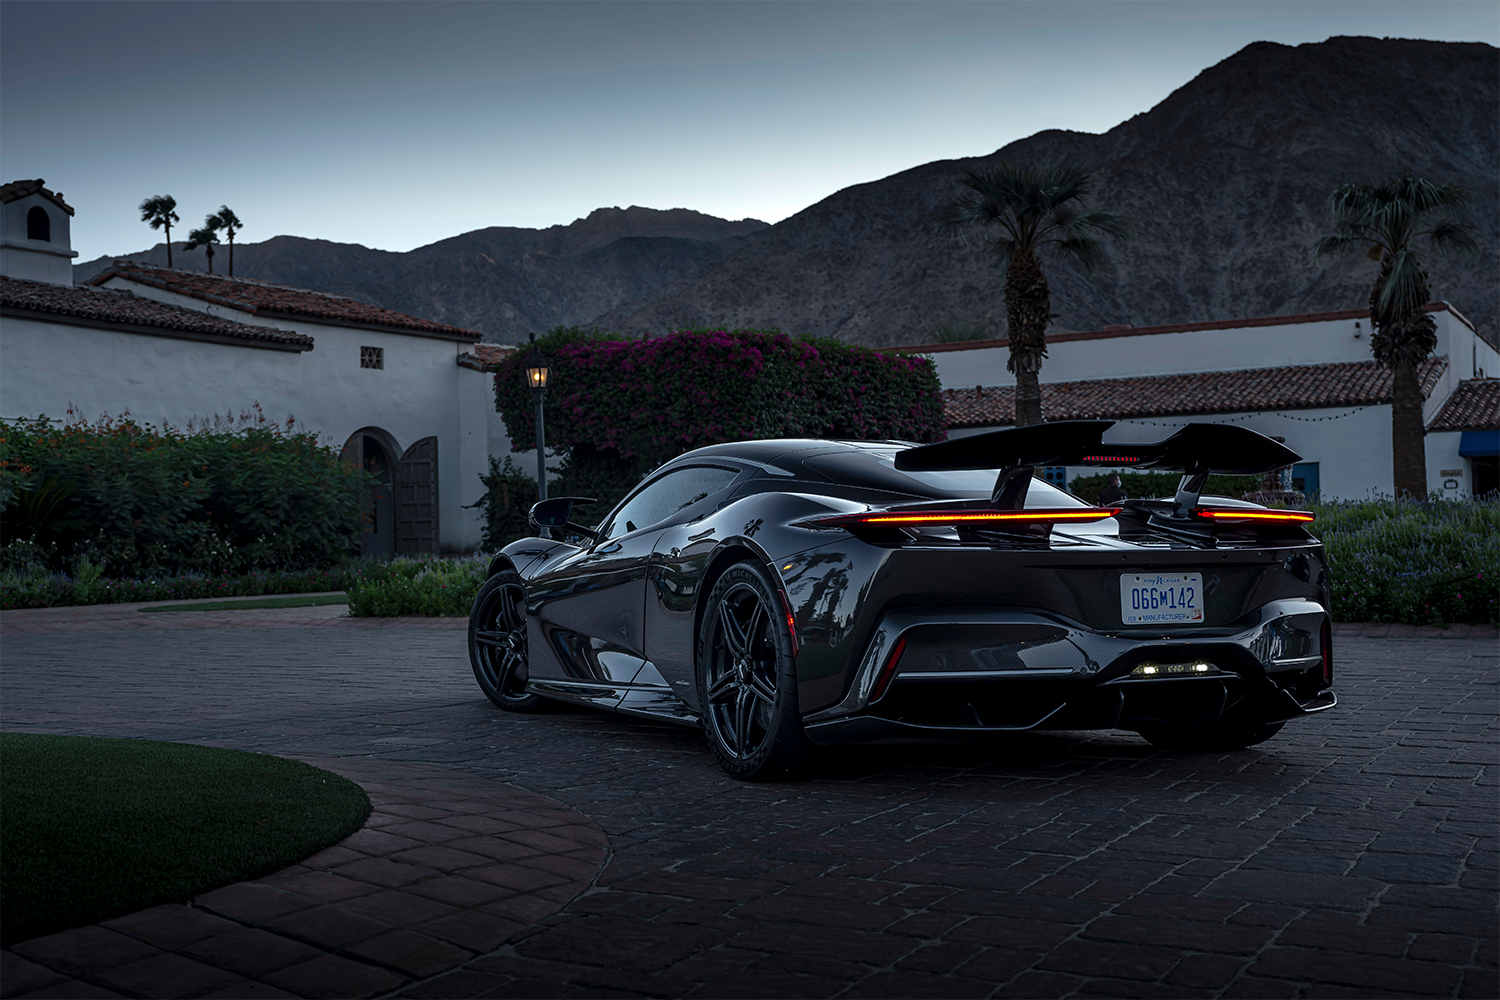 Automobili Pininfarina's new electric hypercar shown from the back in the US at dusk